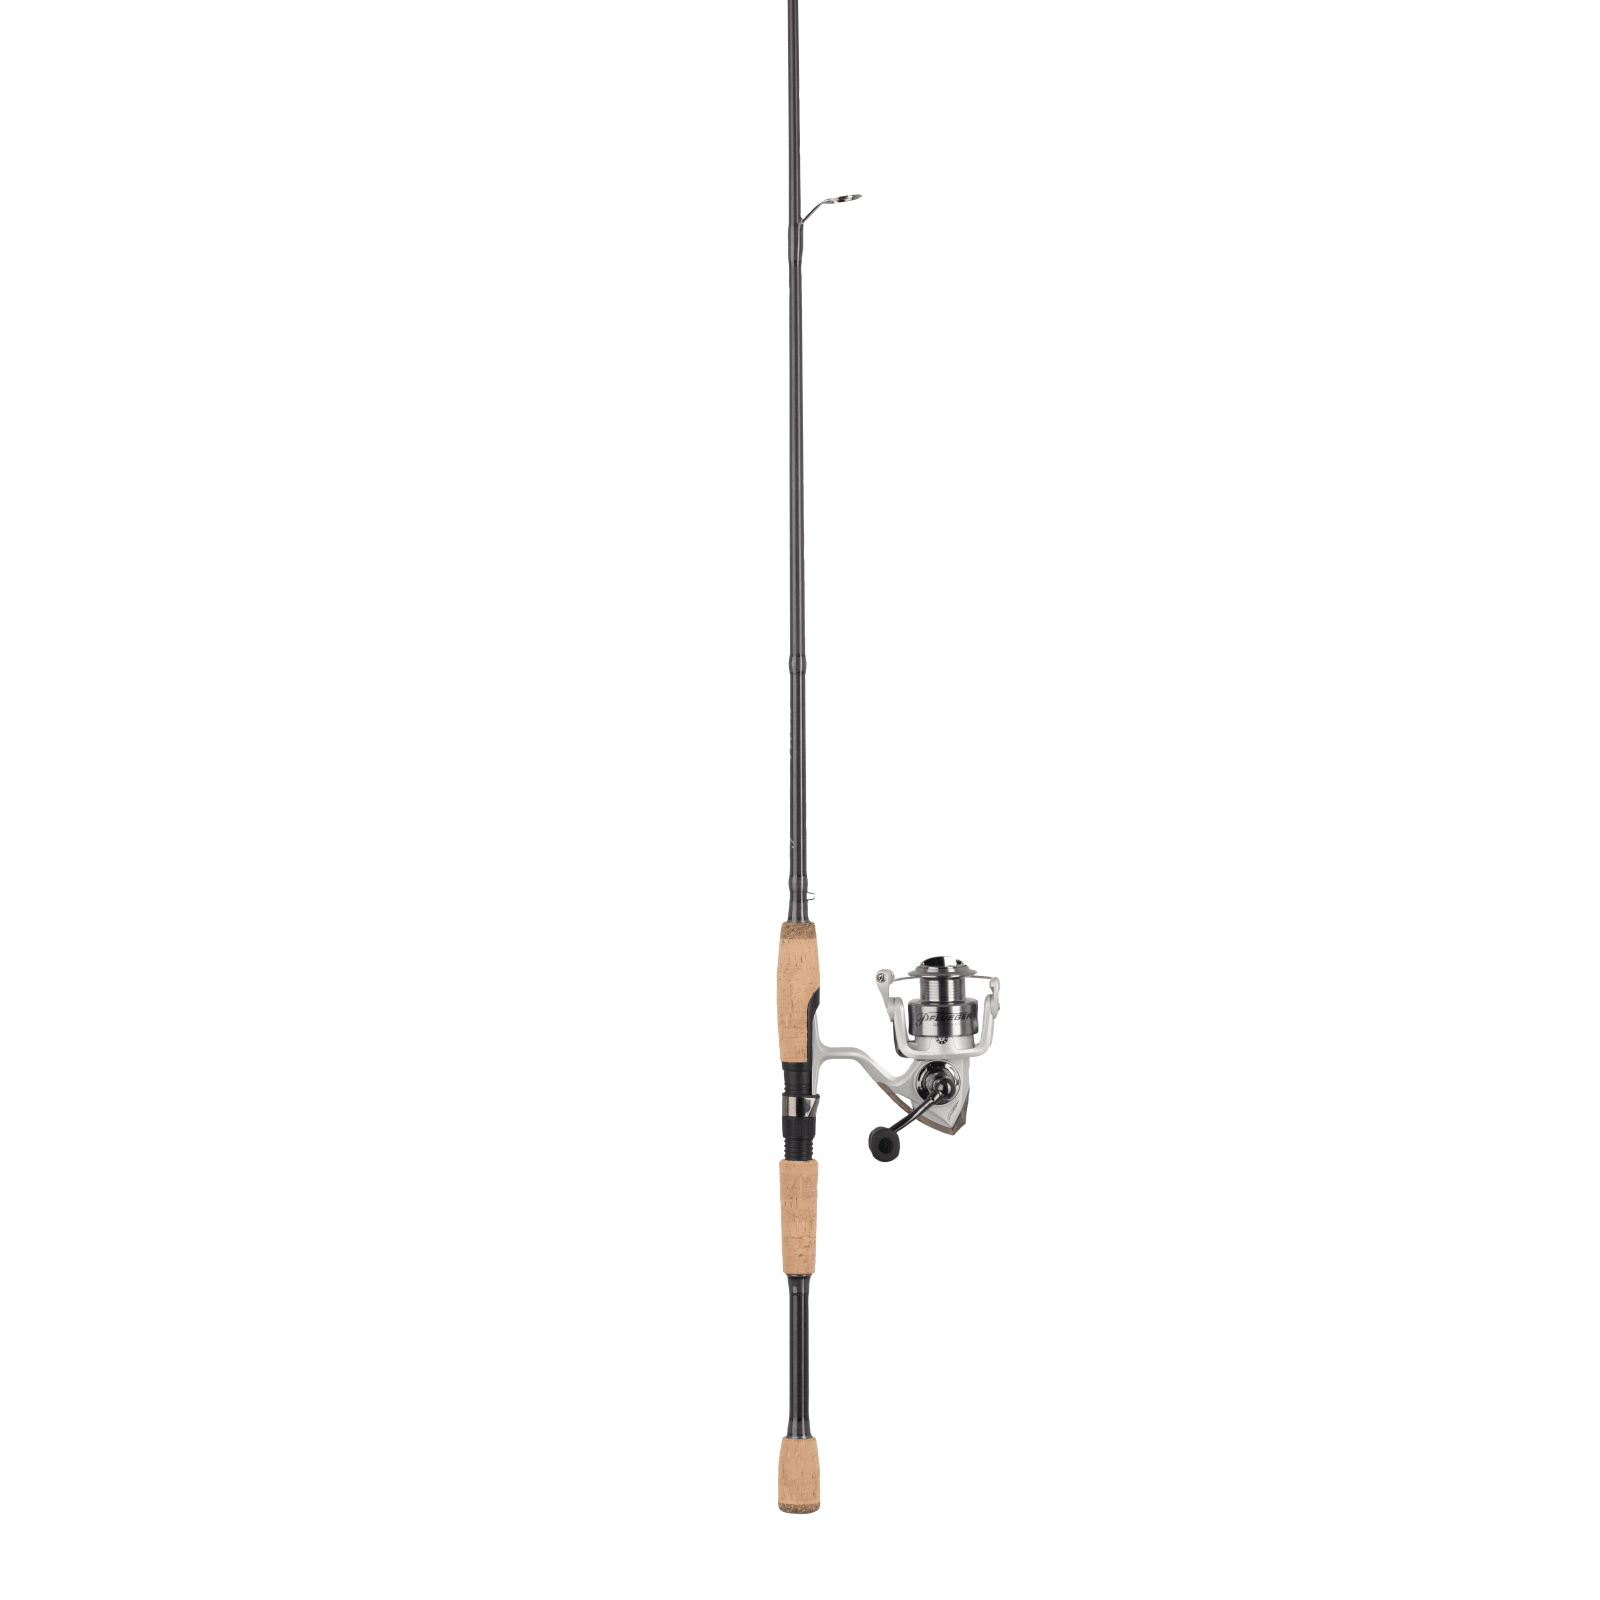 Trion Spinning Combo